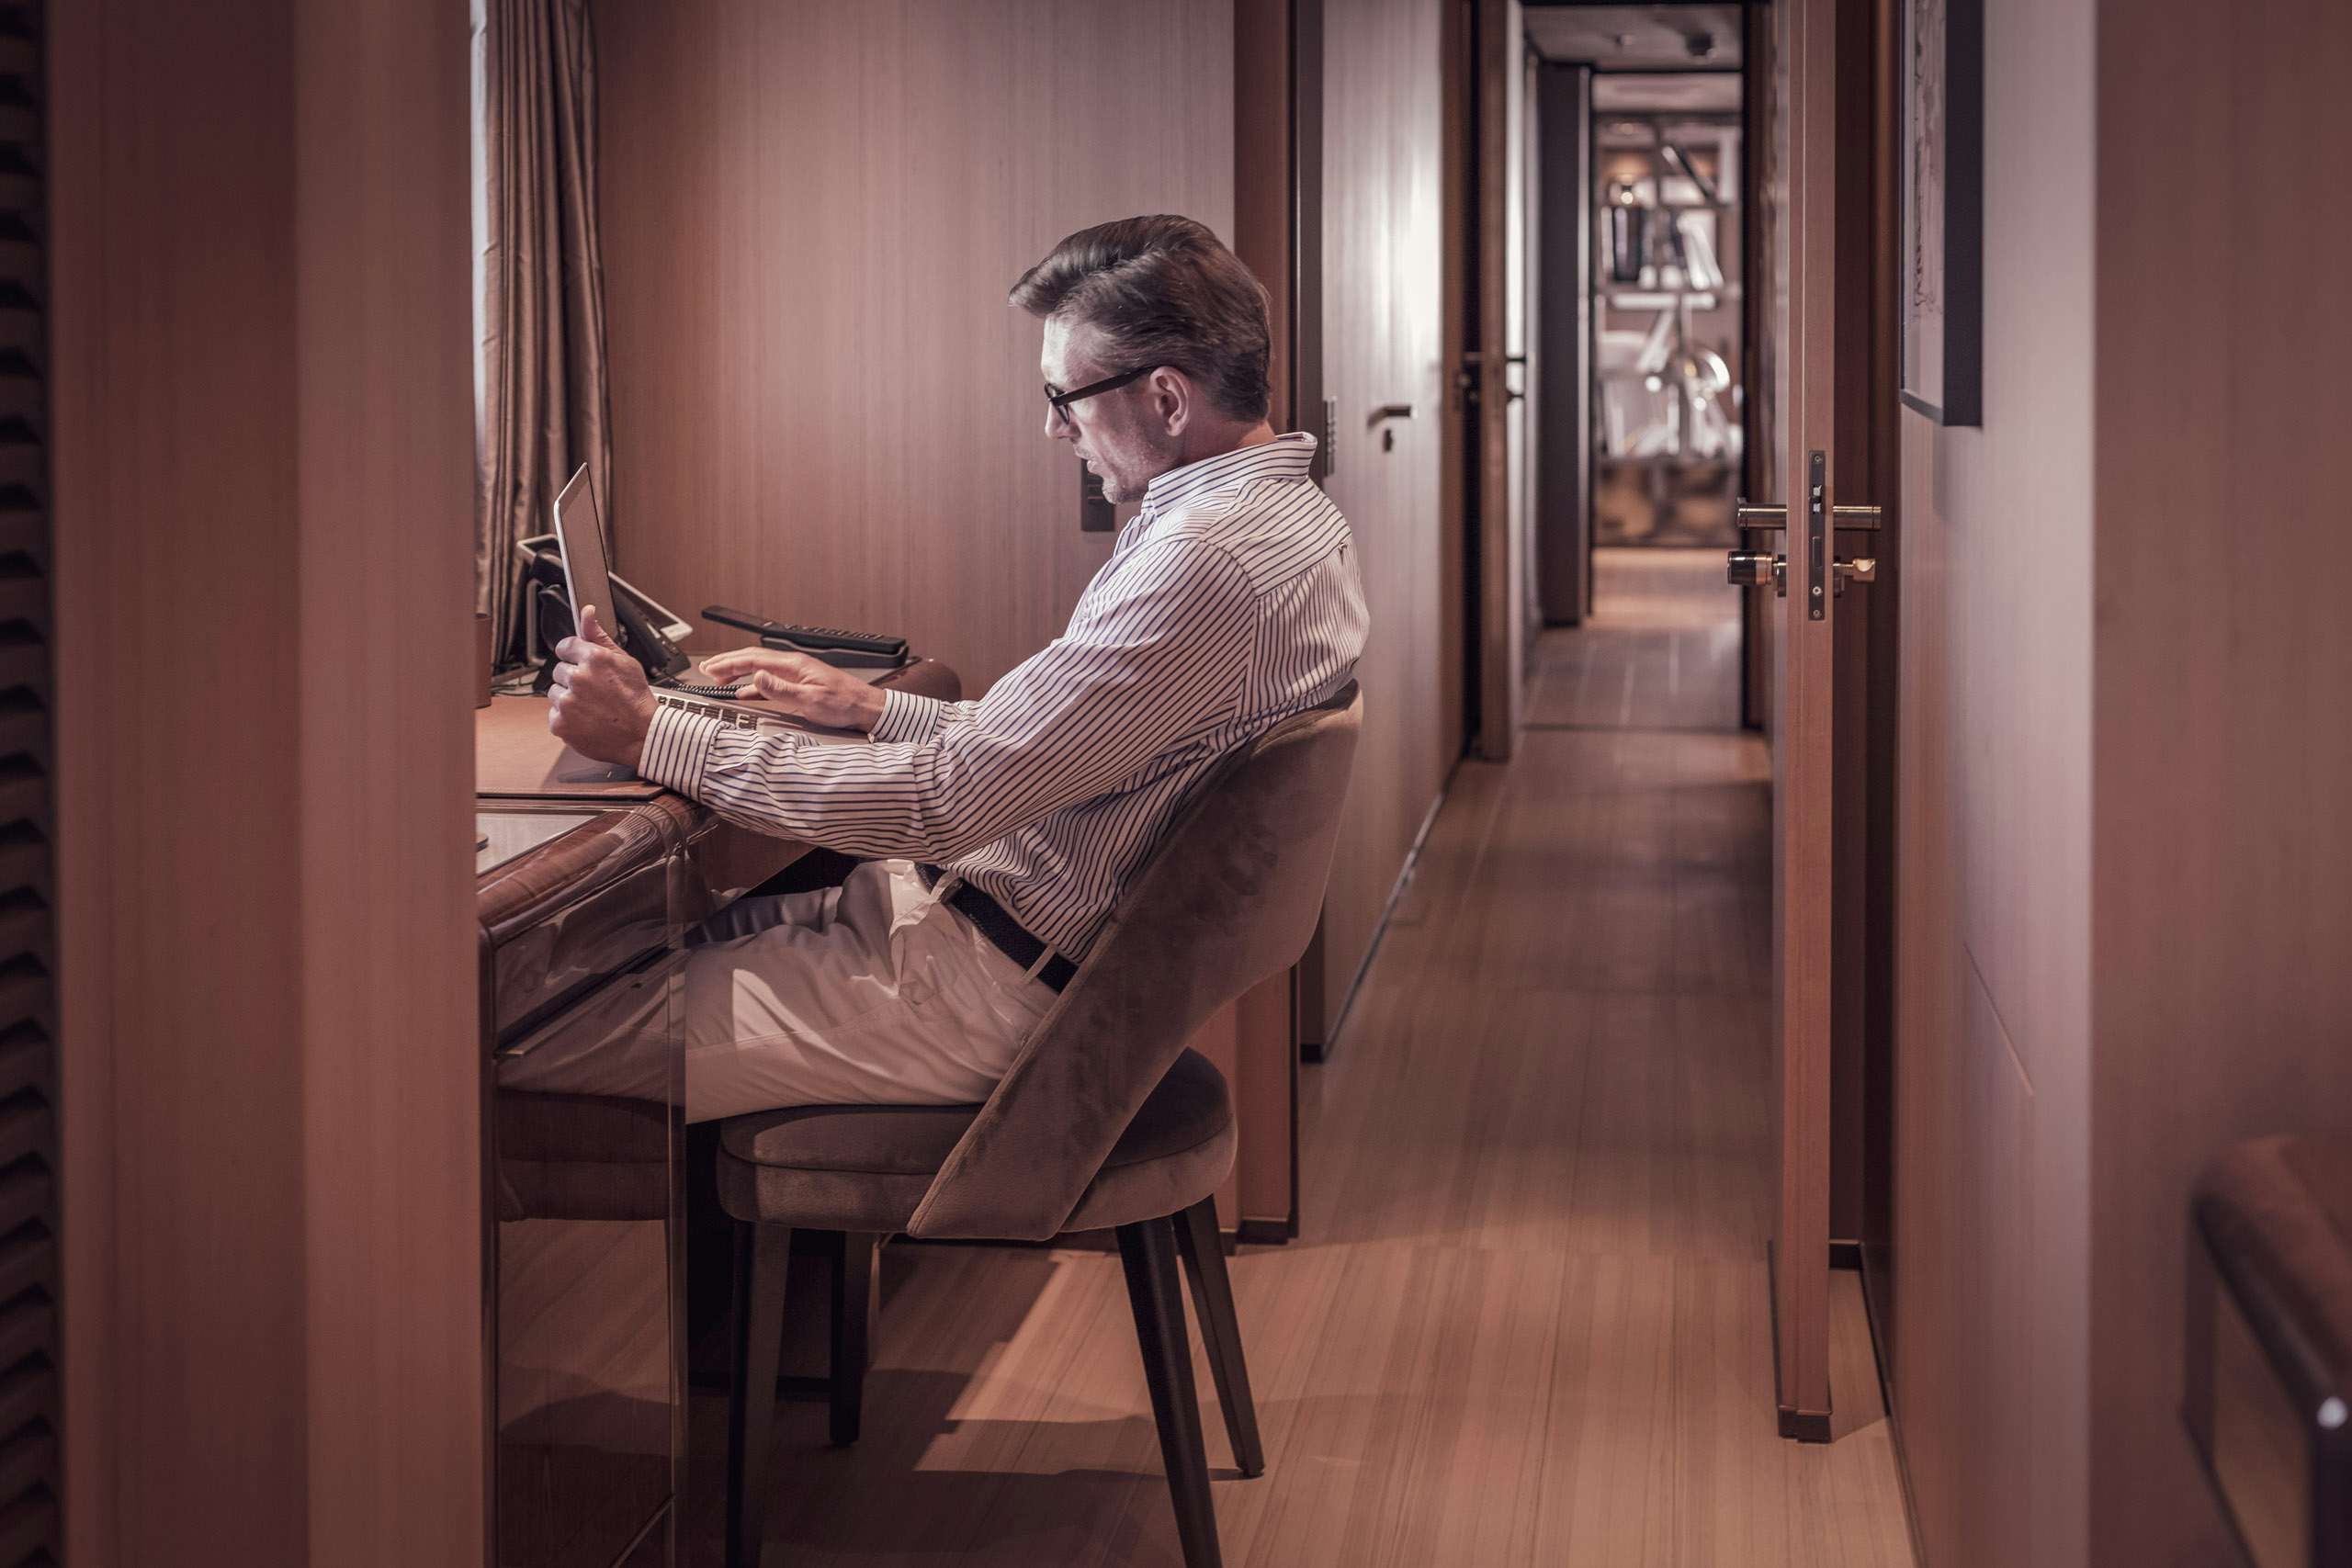 Yacht owner using computer at office on board his yacht